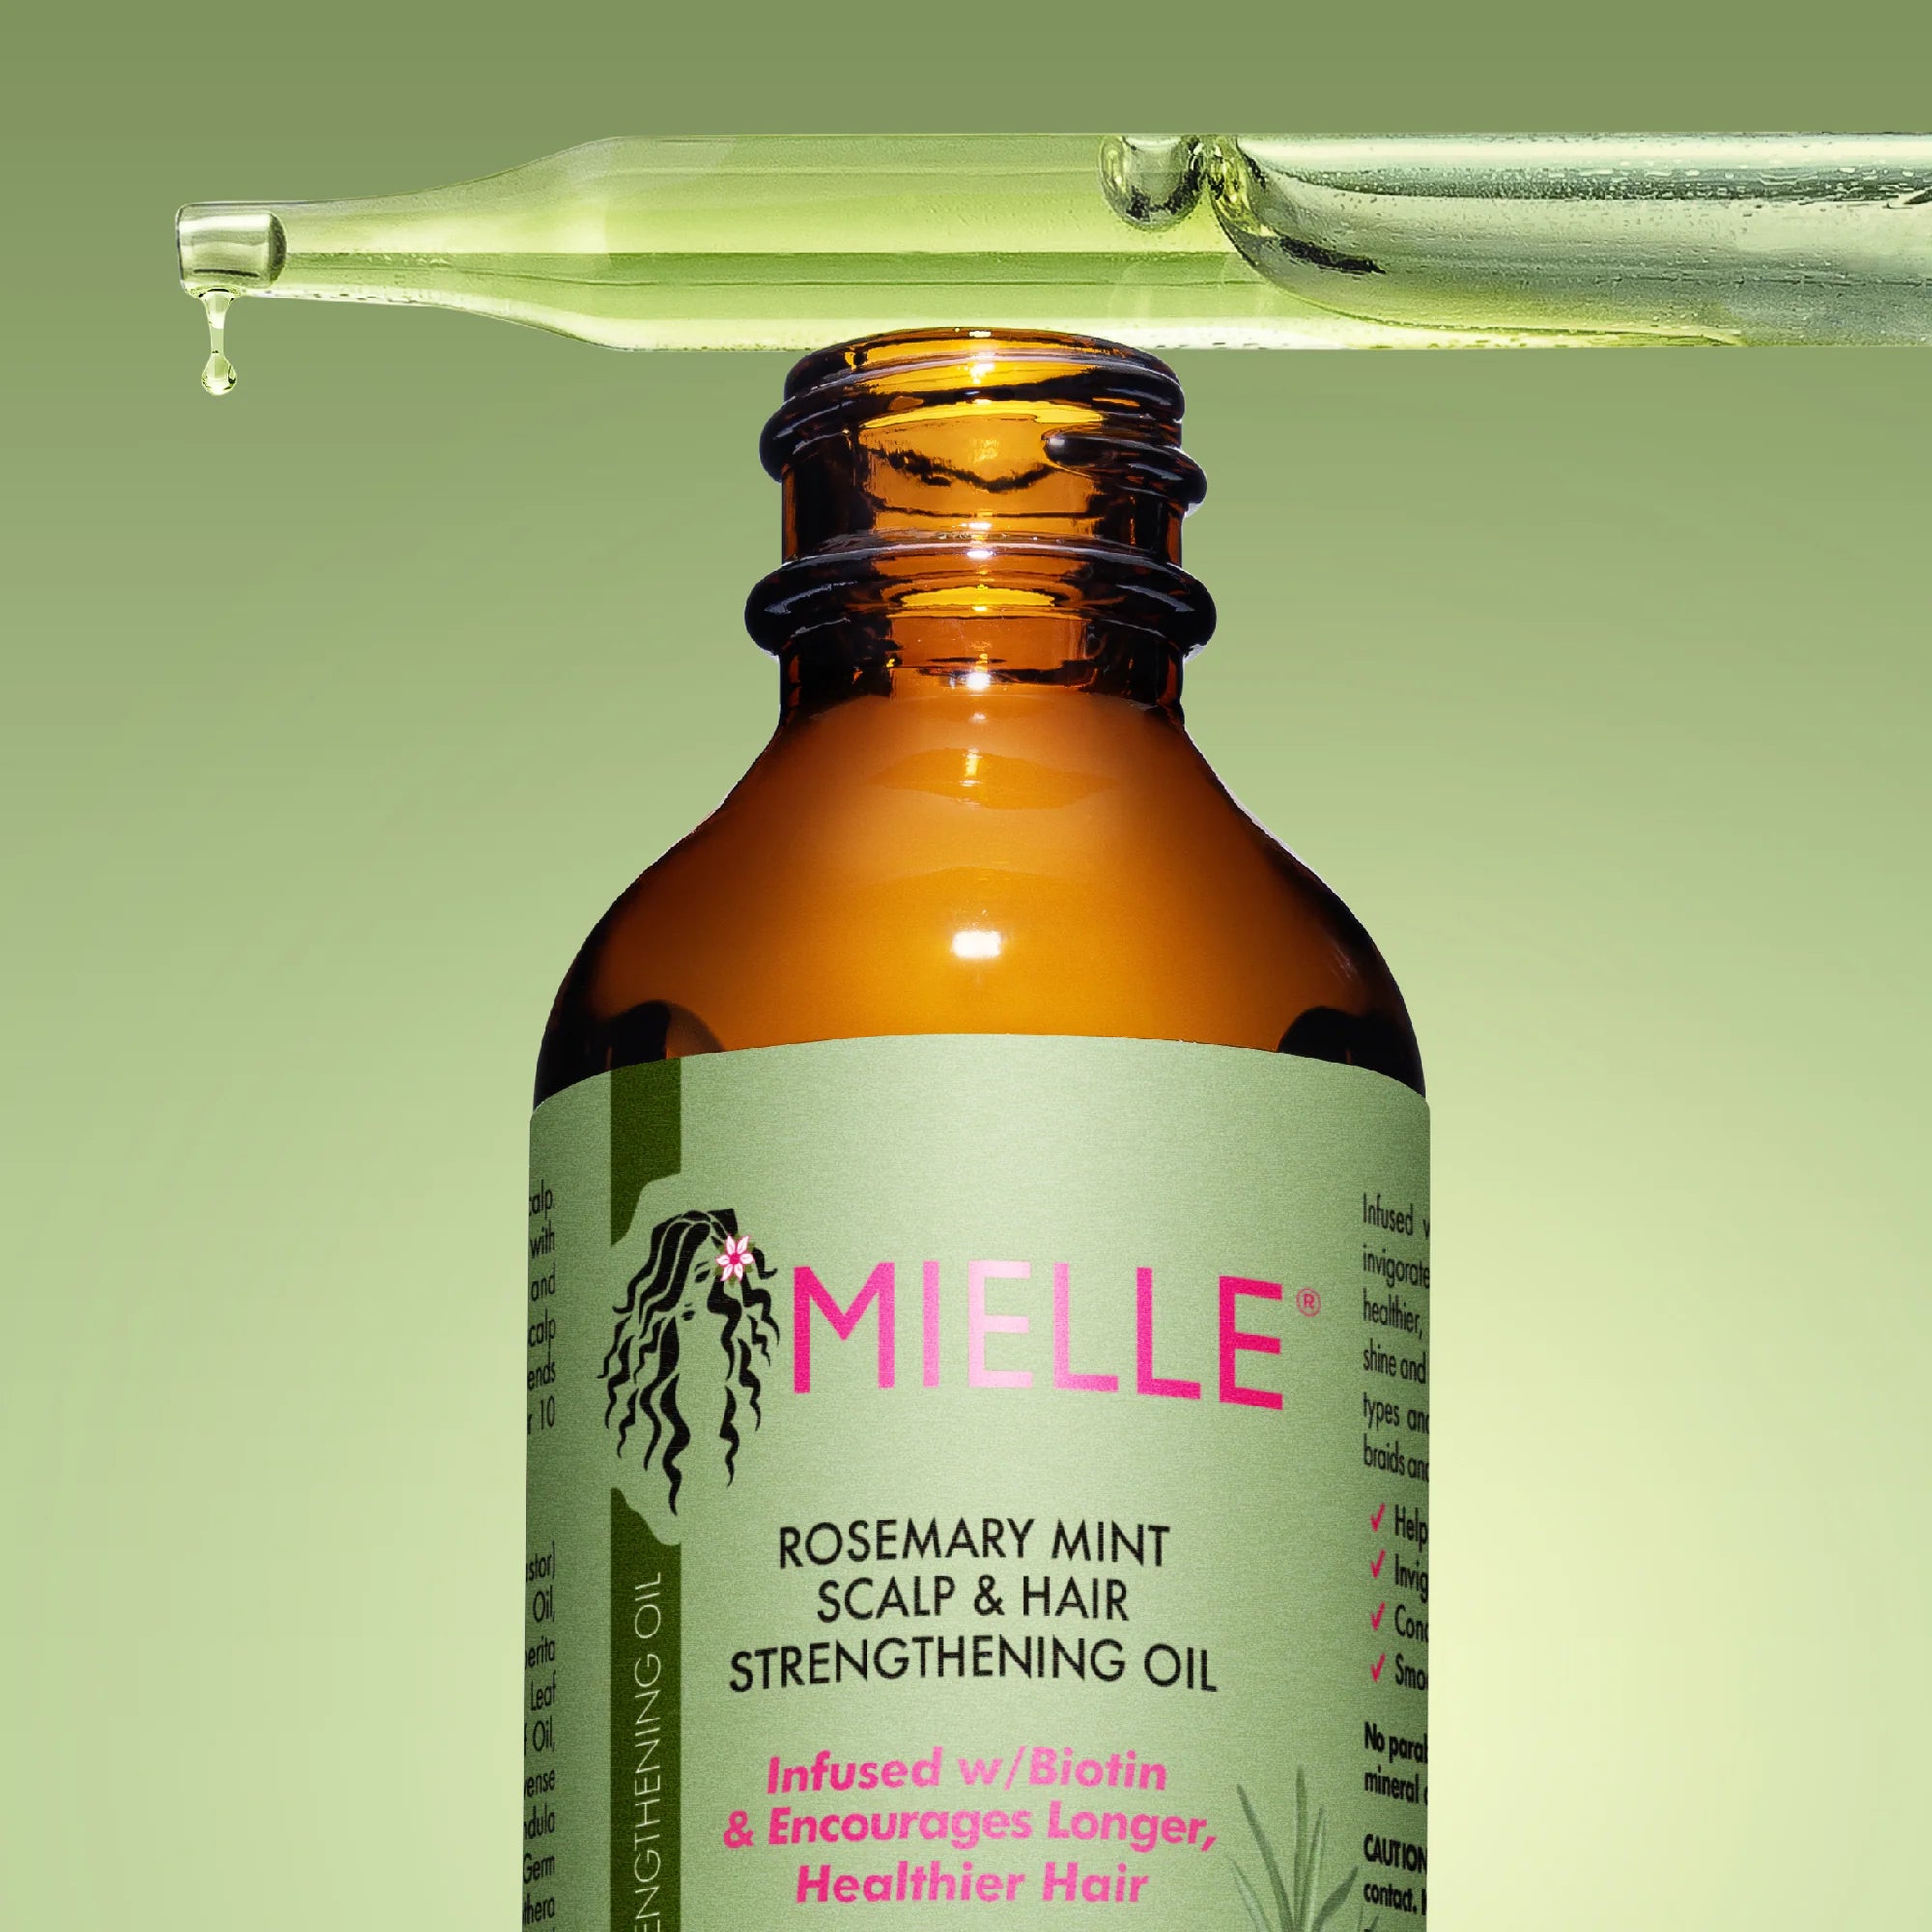 MIELLE rosemary mint scalp & hair stringthening oil infused w/ biotin & encourages growth